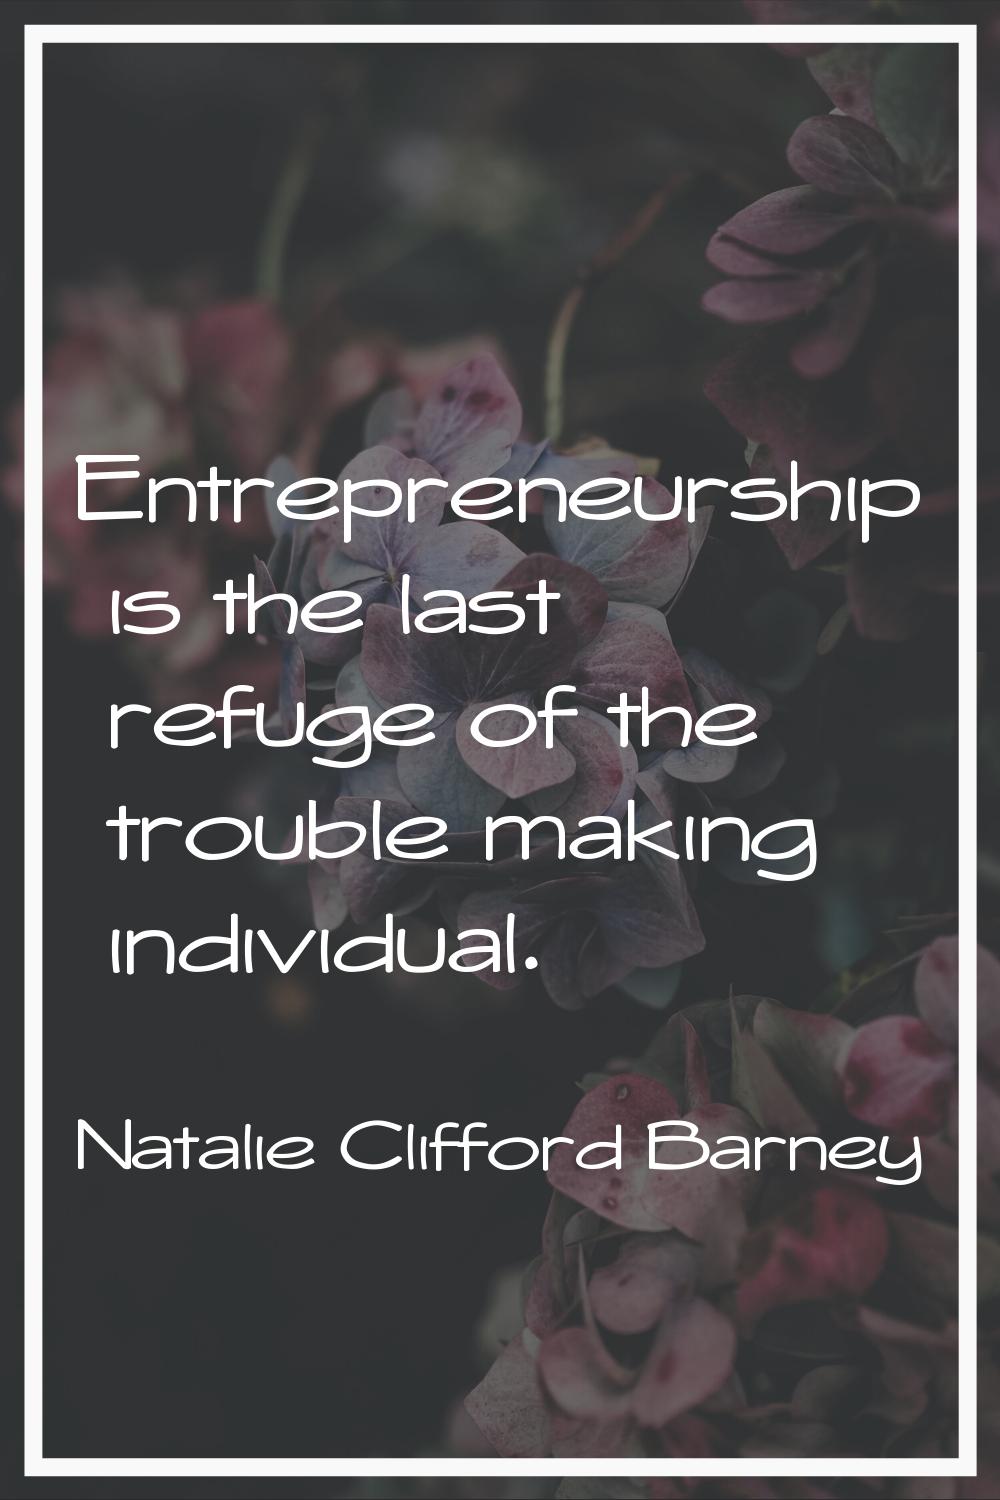 Entrepreneurship is the last refuge of the trouble making individual.